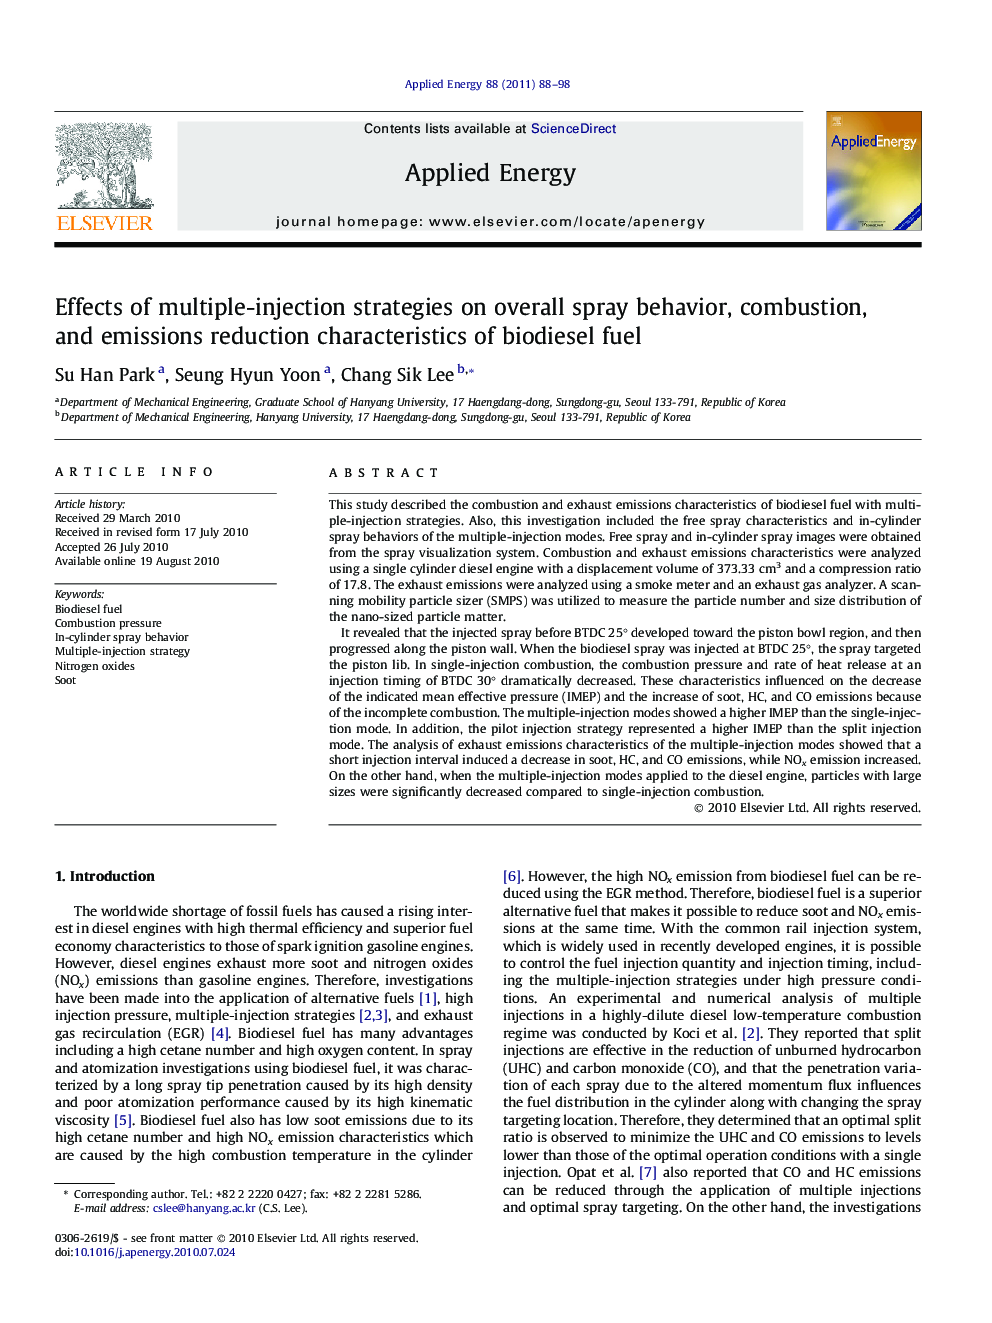 Effects of multiple-injection strategies on overall spray behavior, combustion, and emissions reduction characteristics of biodiesel fuel